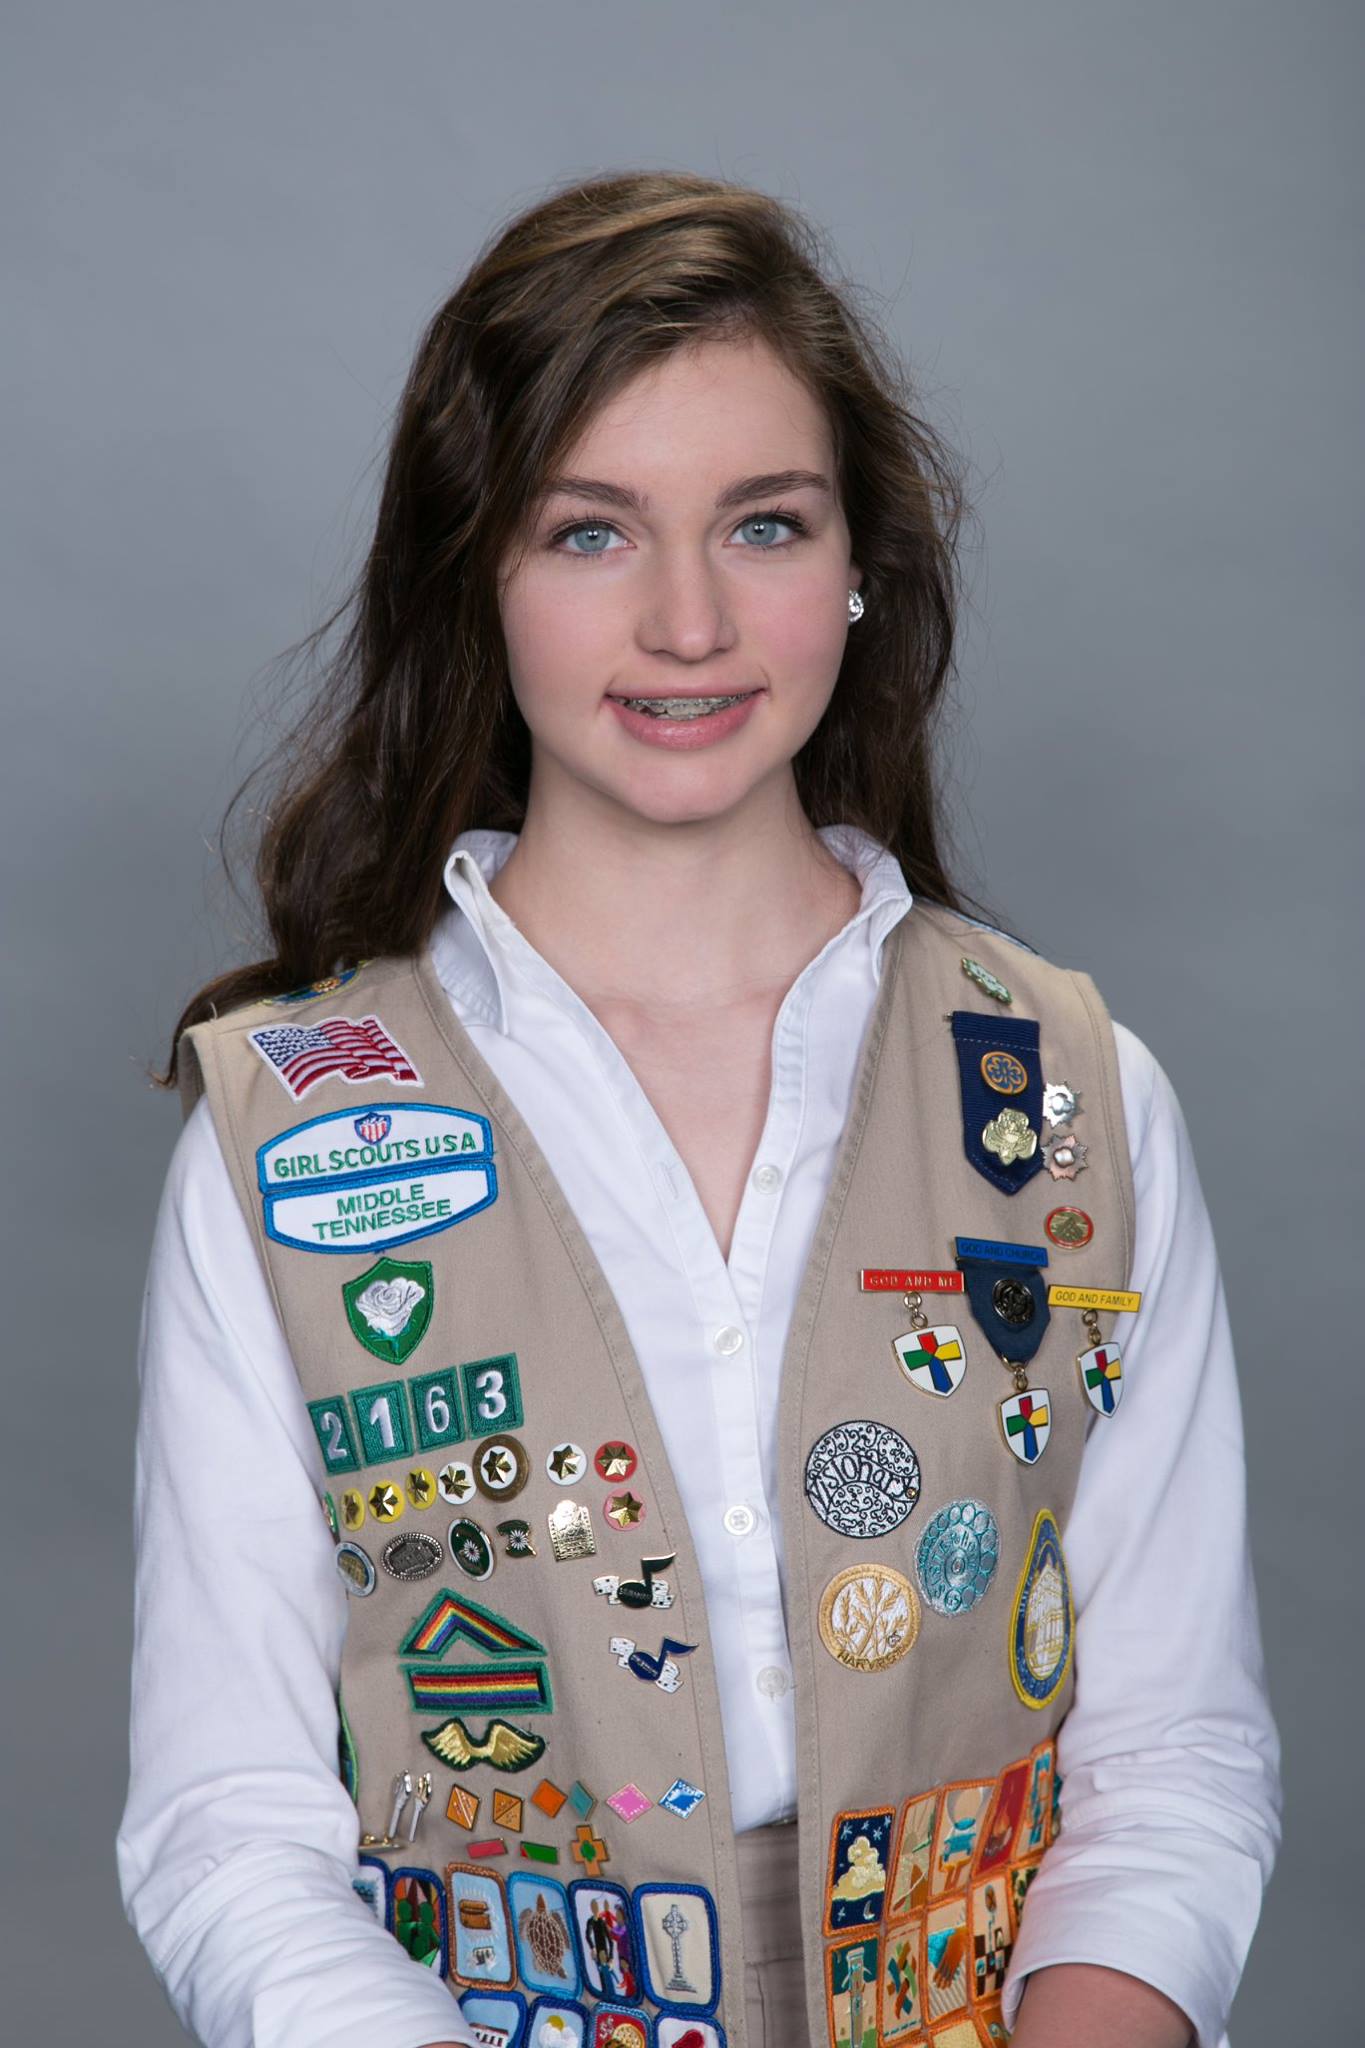 Badges & Patches: What's the Difference? - Girl Scouts of Middle TN